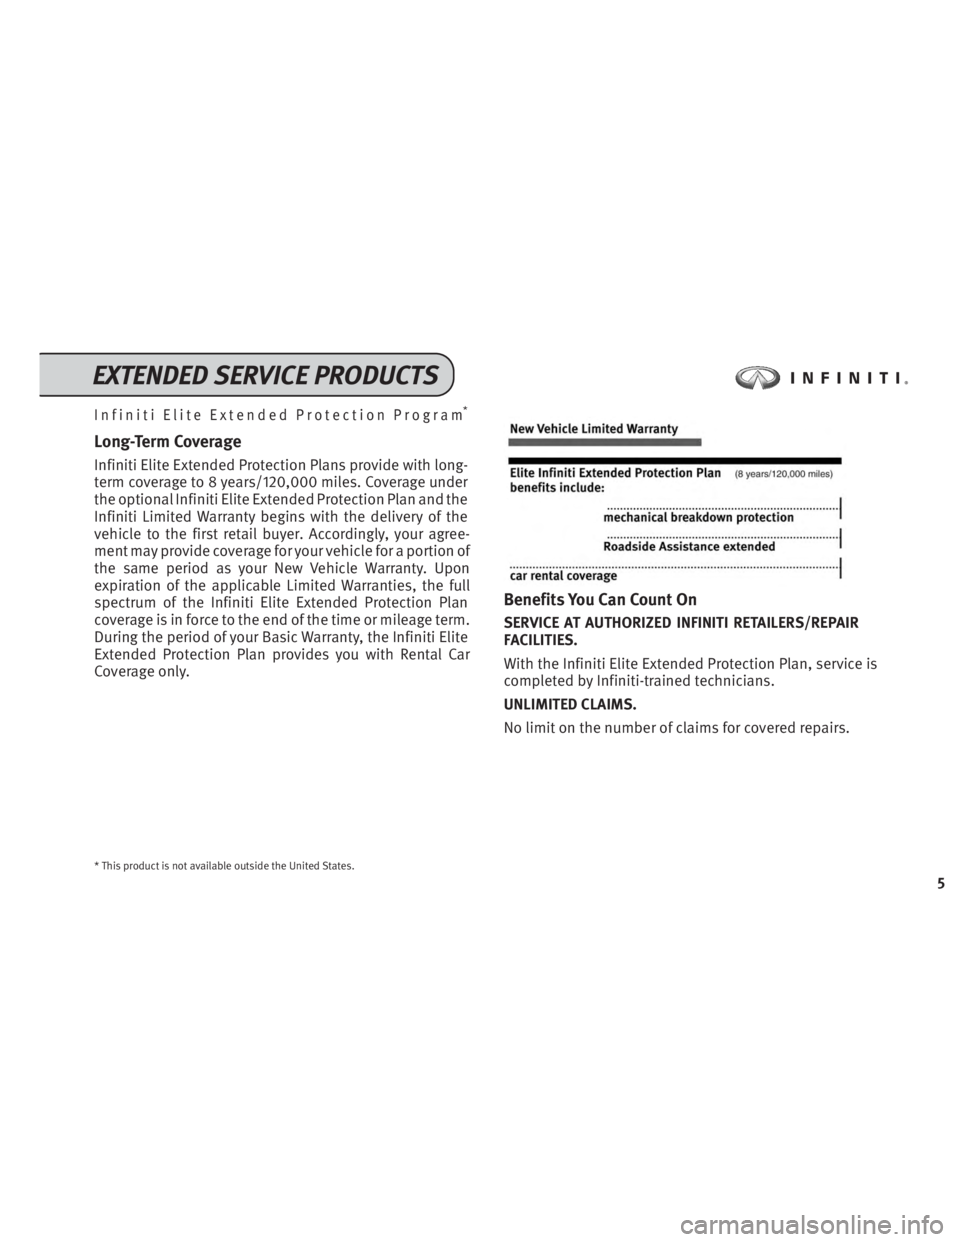 INFINITI QX70 2014  Service And Maintenance Guide Infiniti Elite Extended Protection Program*
Long-Term Coverage
Infiniti Elite Extended Protection Plans provide with long-
term coverage to 8 years/120,000 miles. Coverage under
the optional Infiniti 